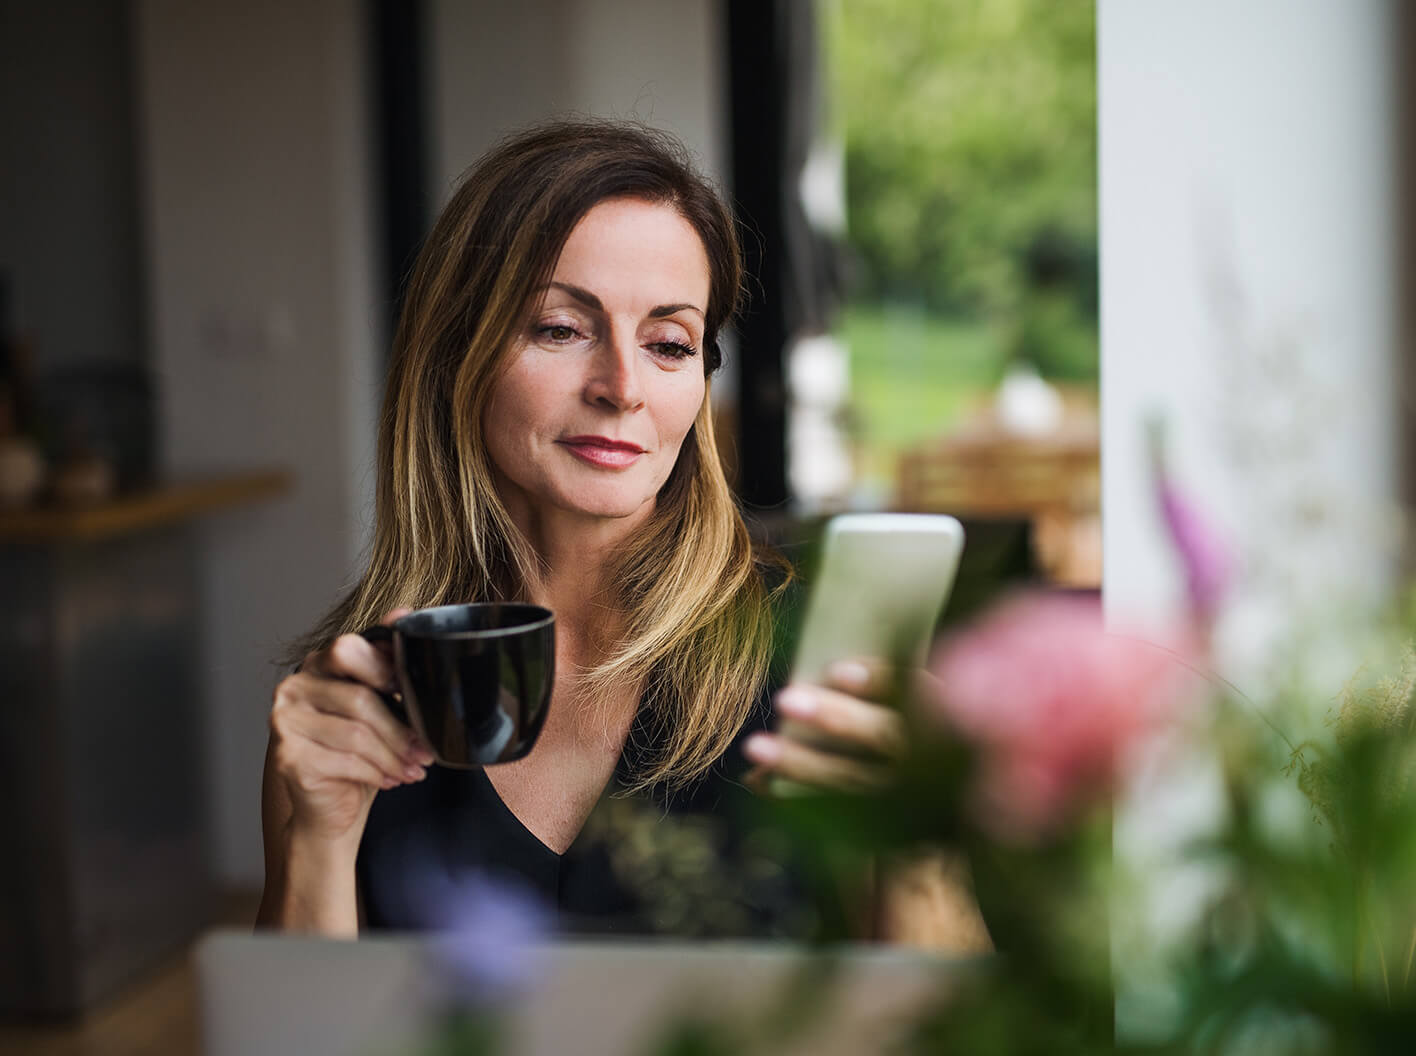 Woman looking at her phone while holding a beverage mug.